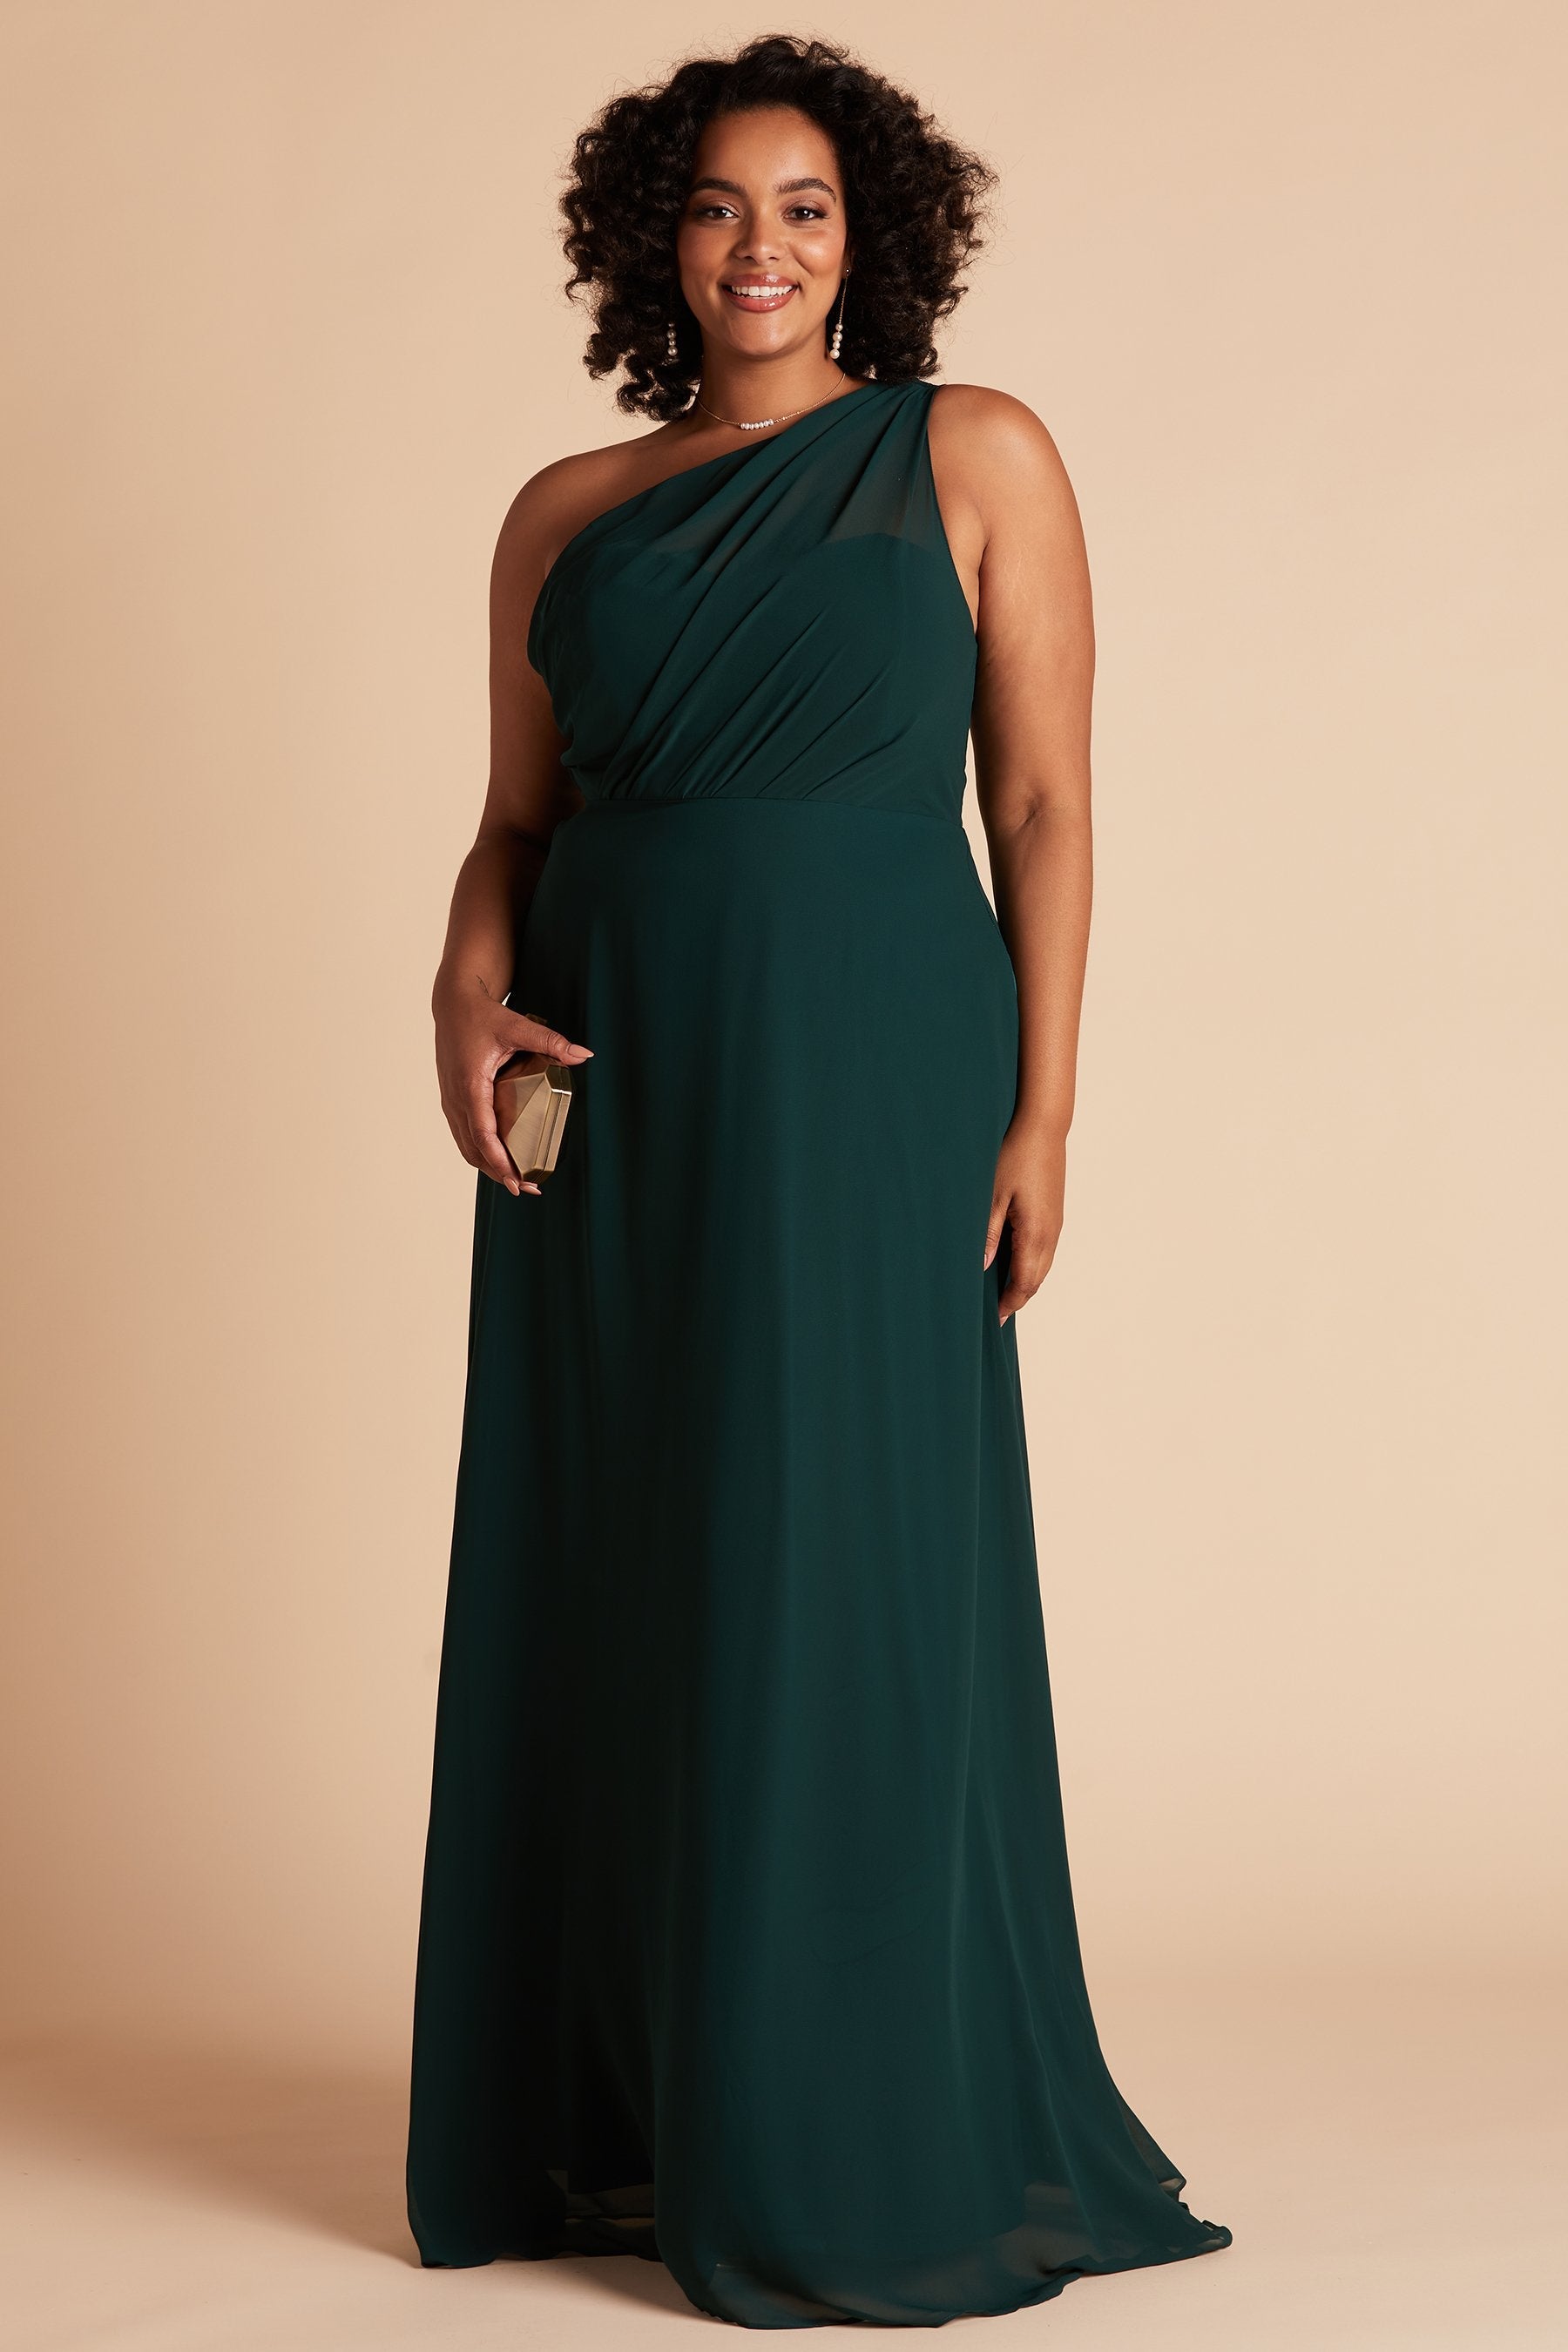 Kira plus size bridesmaid dress in emerald chiffon by Birdy Grey, front view